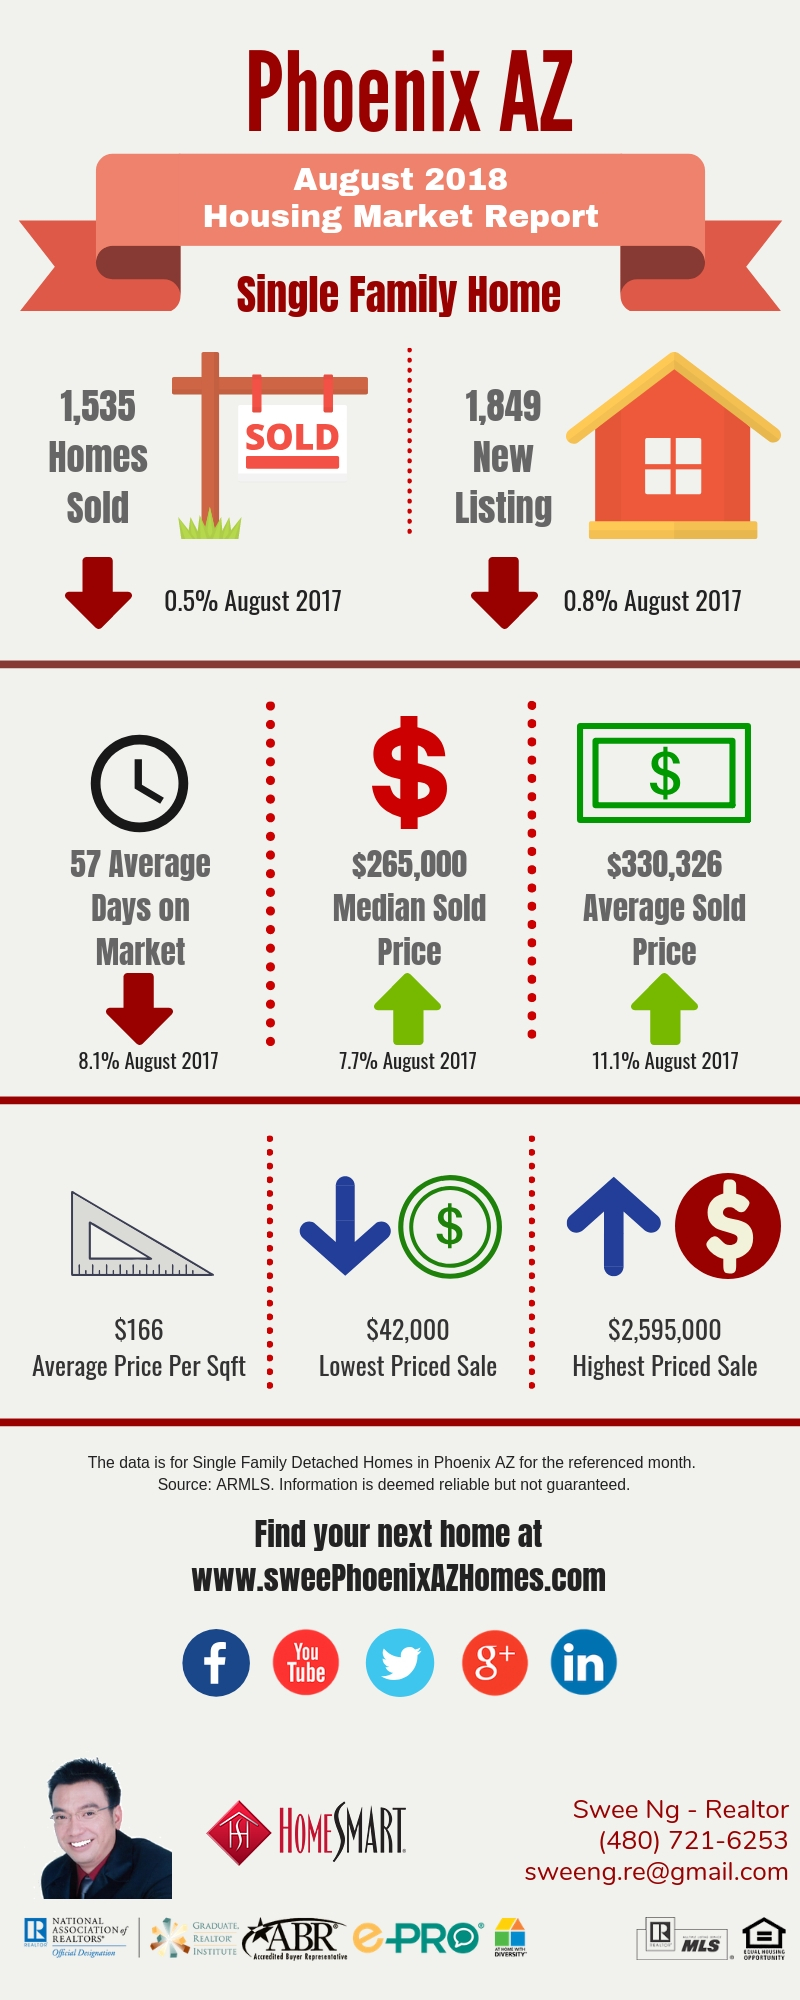 Phoenix AZ Housing Market Trends Report August 2018 by Swee Ng